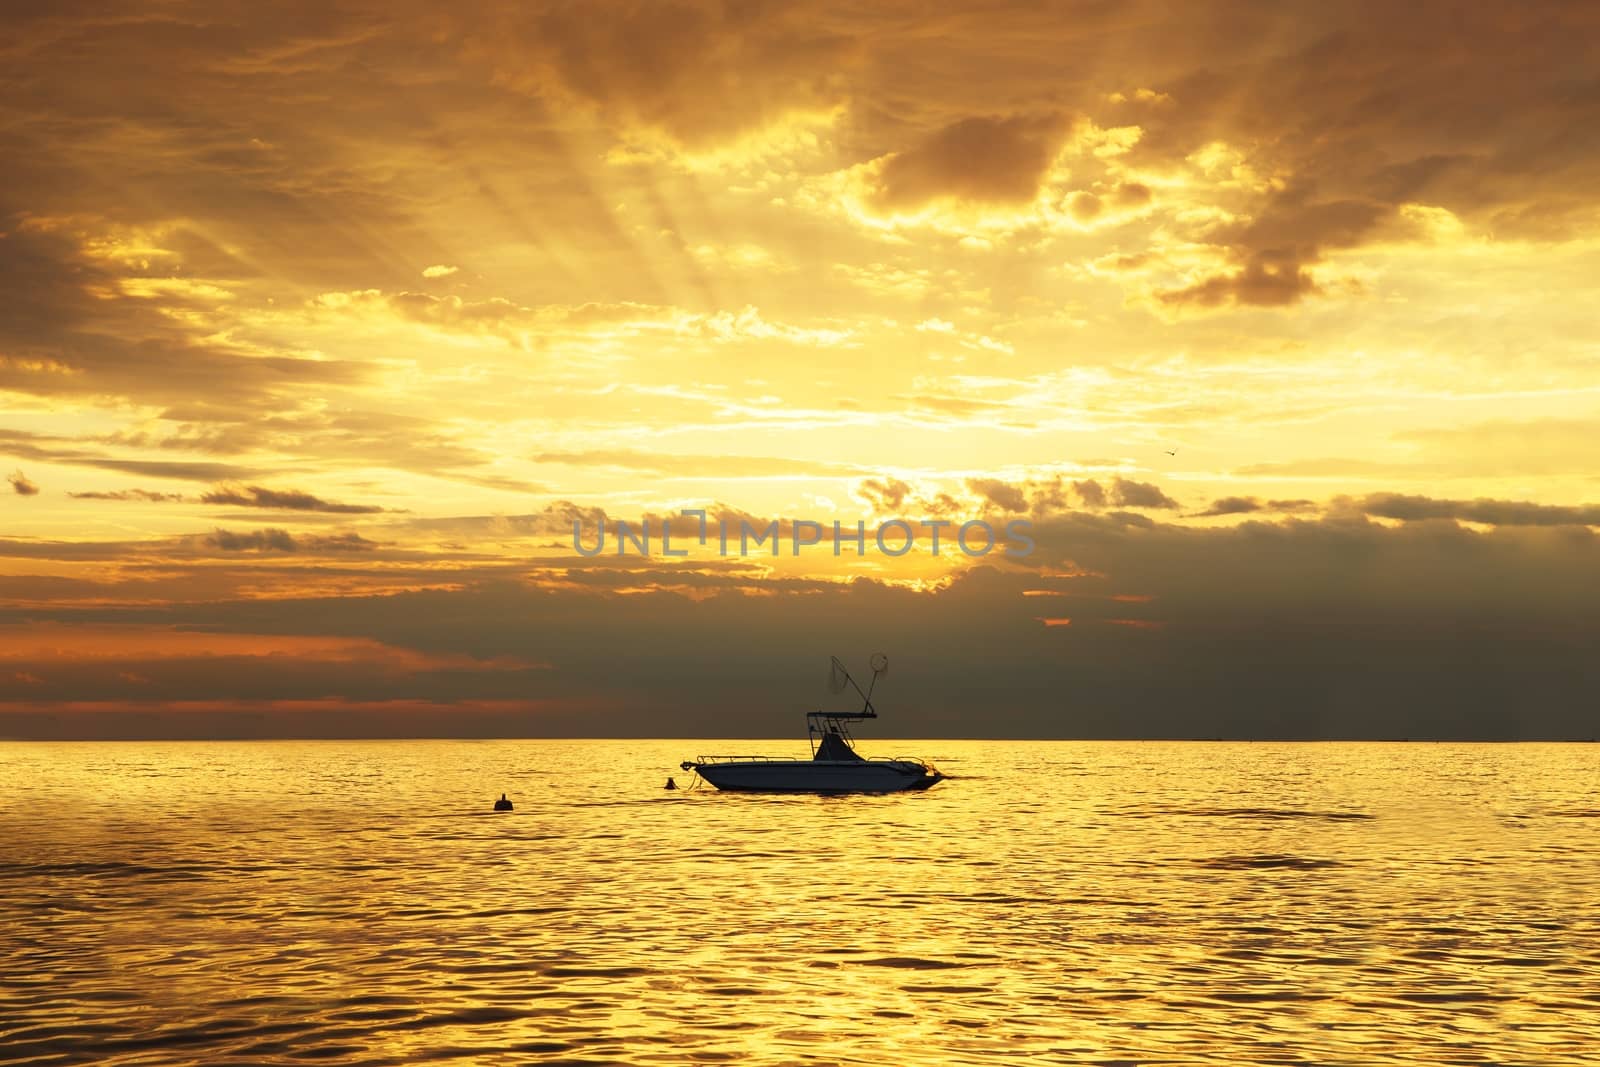 Golden sunset with the silhouette of small boat